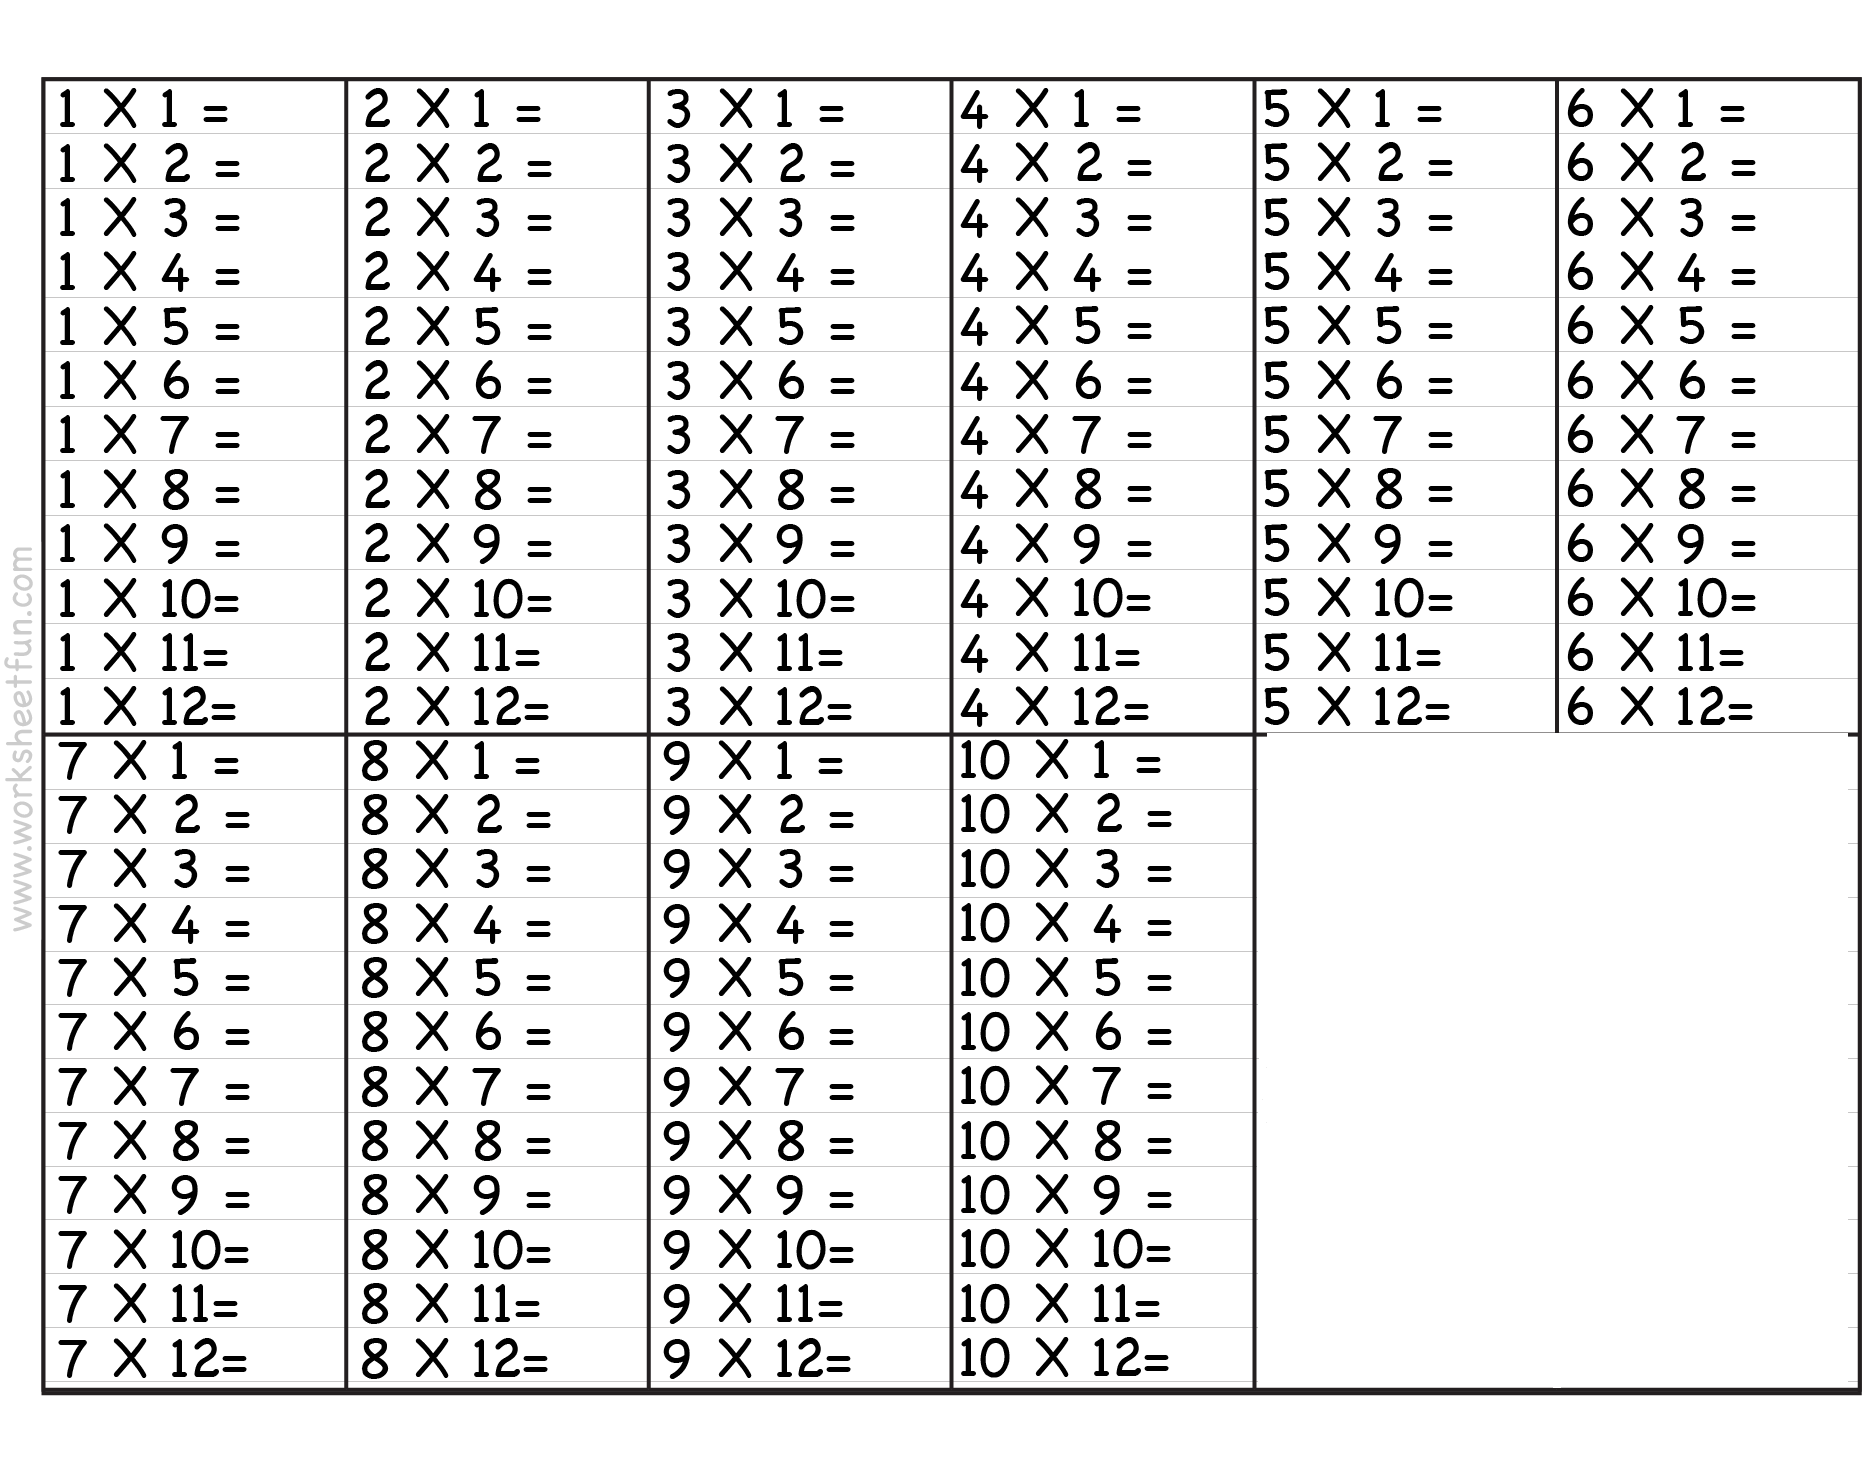 multiplication-table-1-to-10-pdf